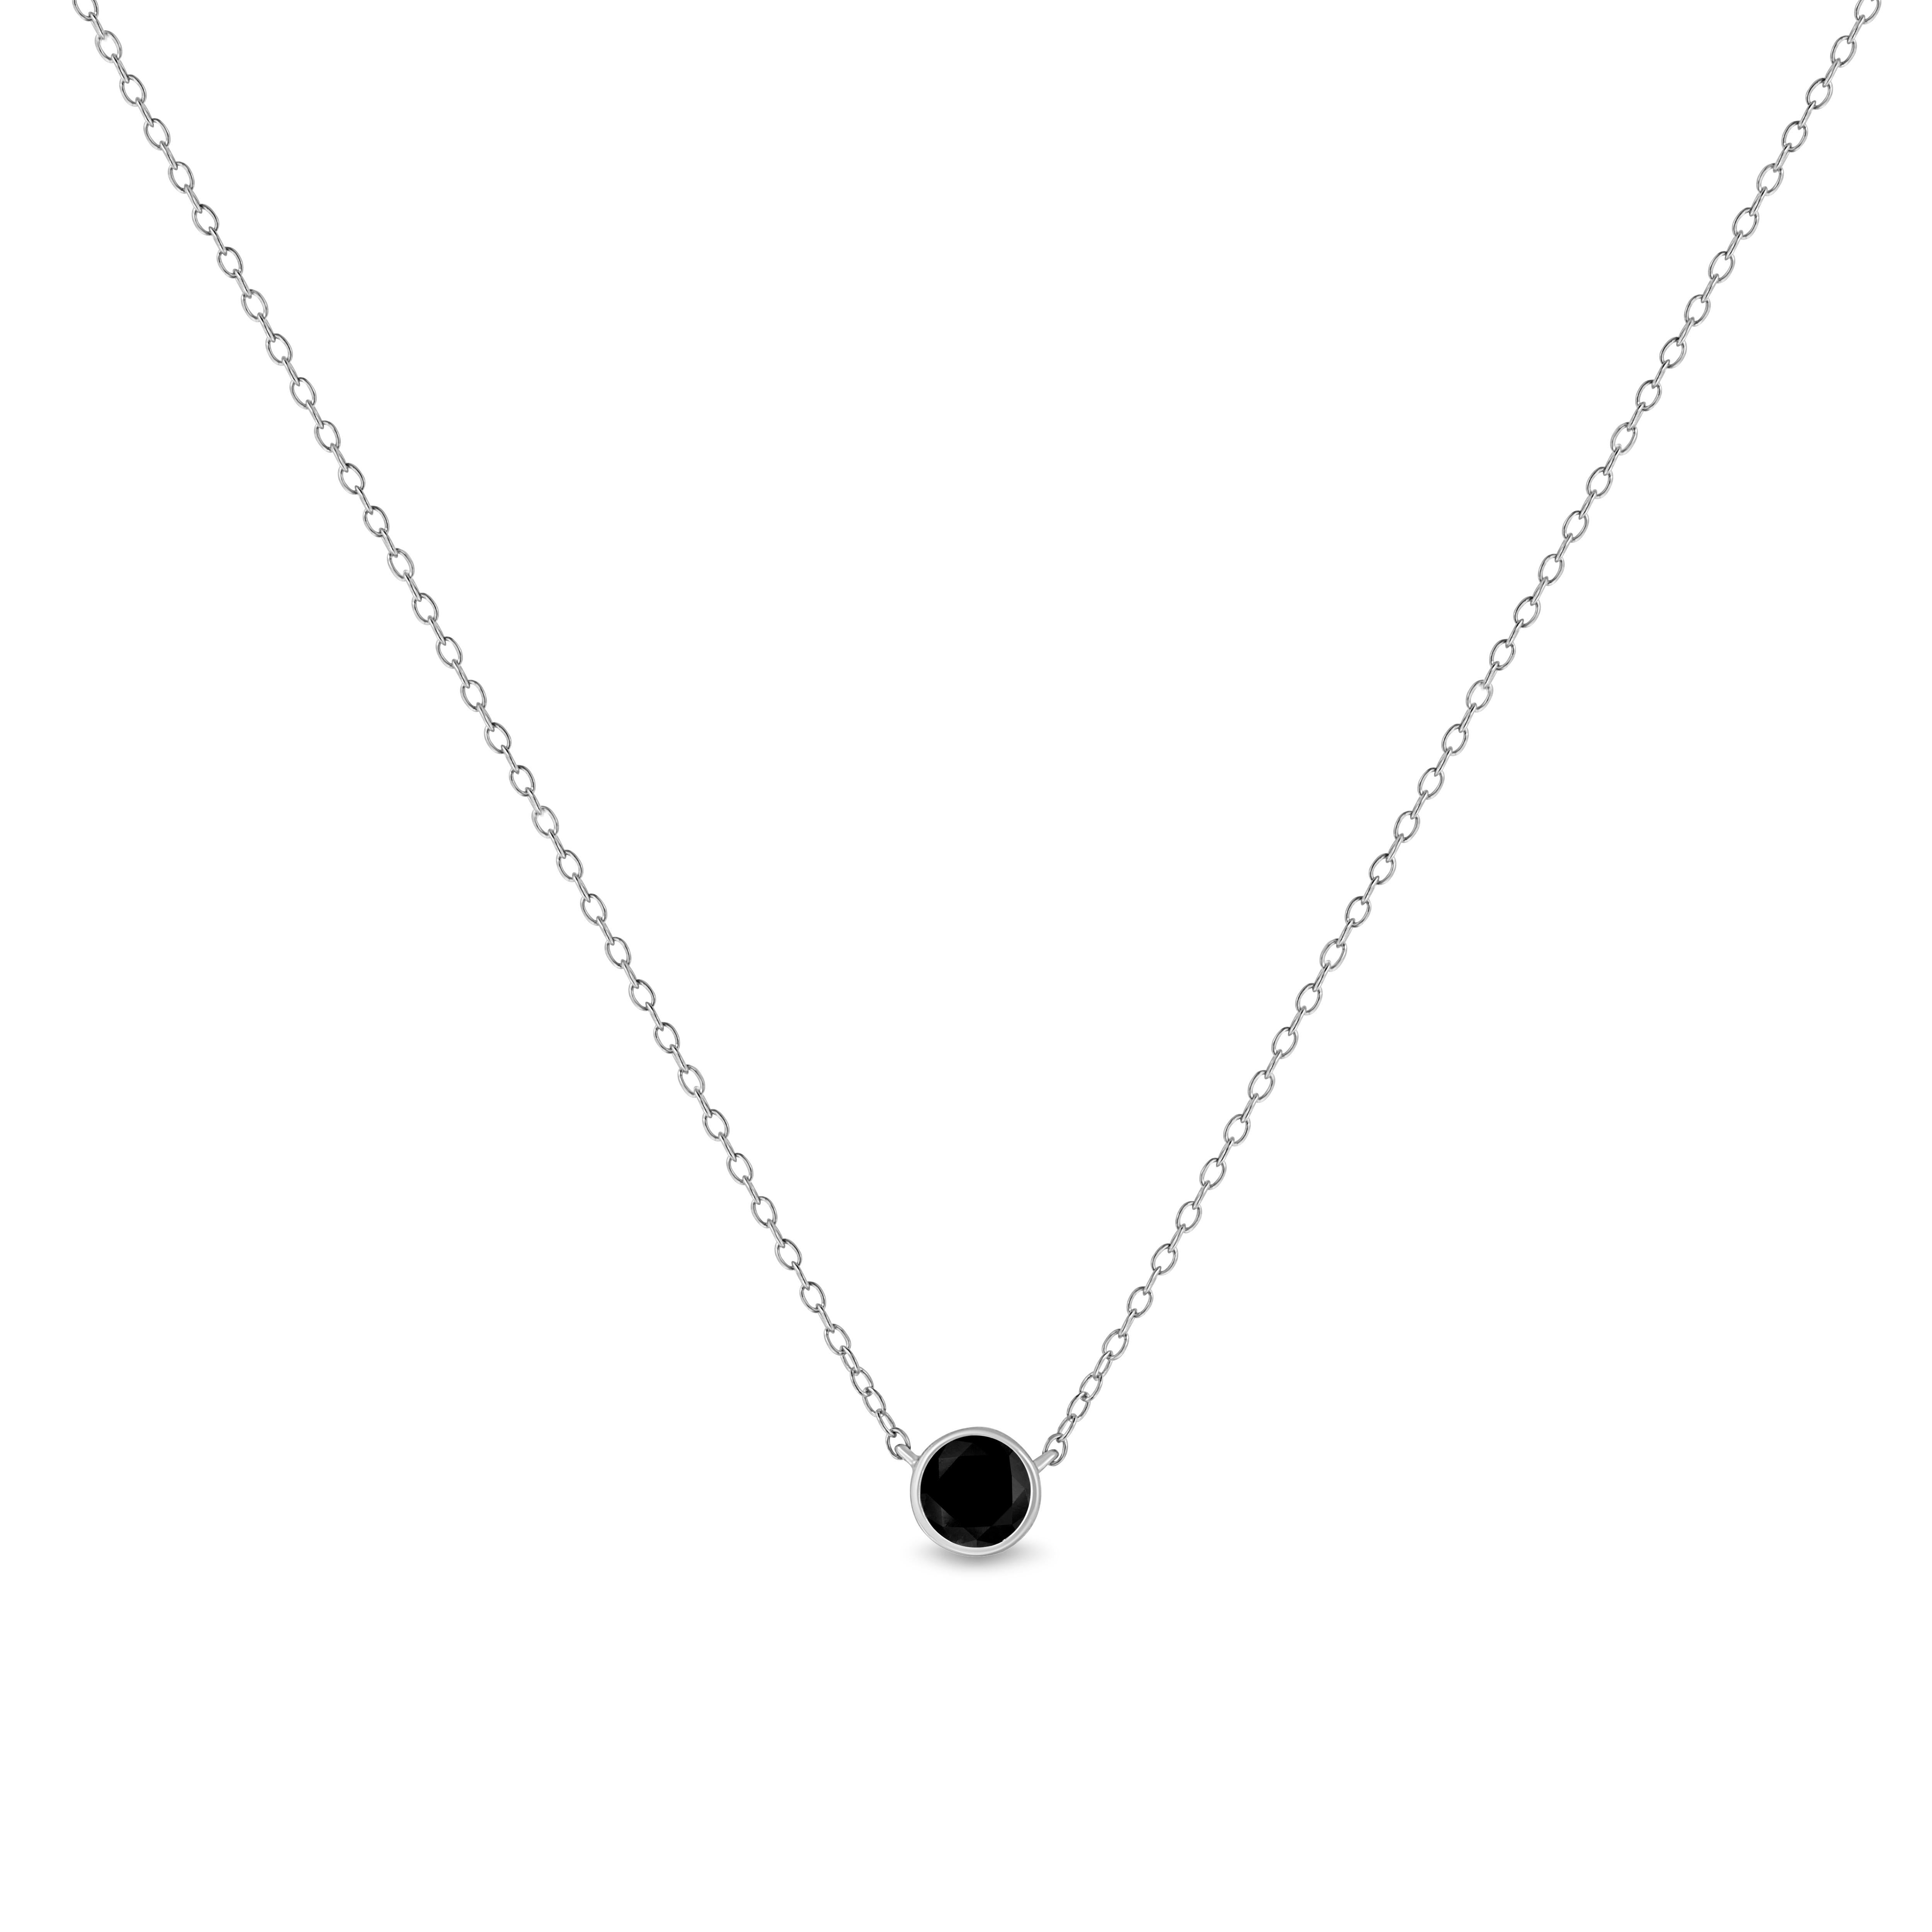 This gorgeous solitaire pendant boasts a stunning single, round-cut treated black diamond in a bezel setting. Designed in the finest .925 sterling silver, this necklace has a total diamond weight of 3 ct. This piece is the perfect accessory to any